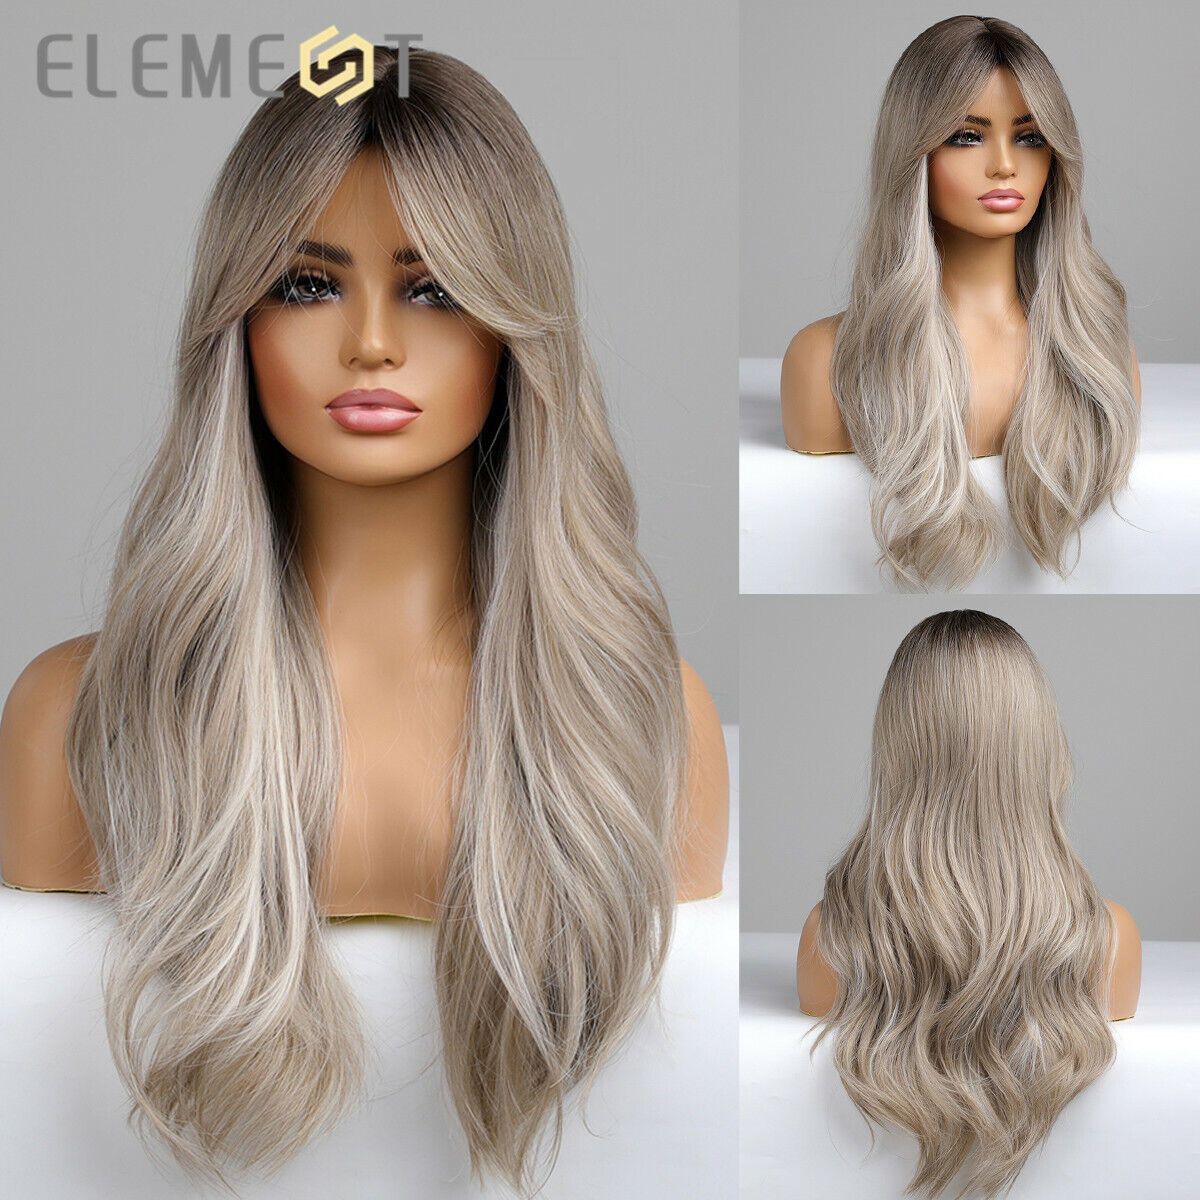 Element Hair Wigs for Women Long Wavy Ash Brown Blonde Wig with Bangs Daily  Use | eBay